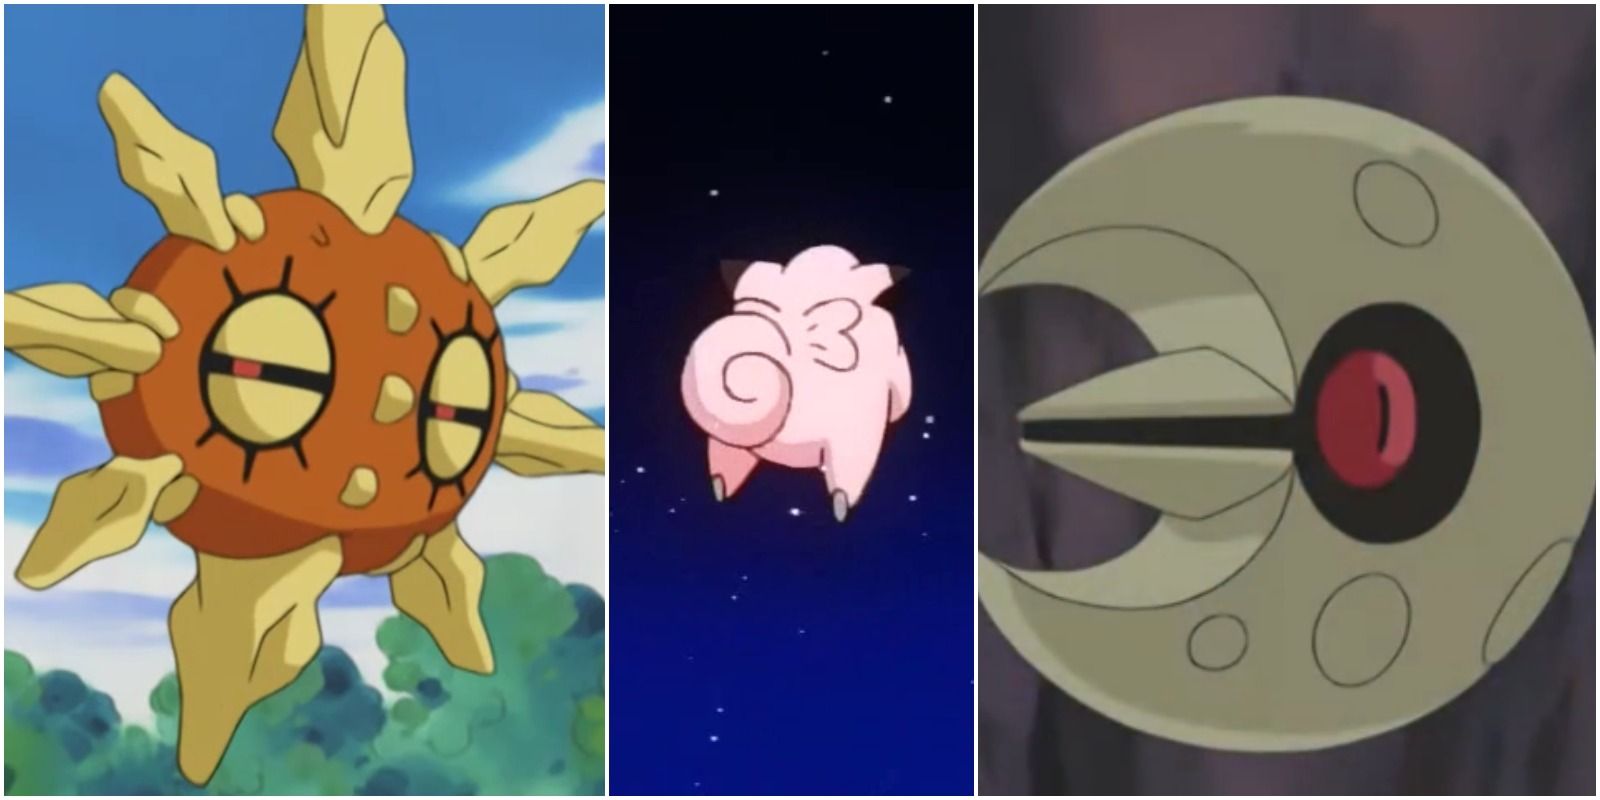 solrock, clefairy, and lunatone from the pokemon anime.